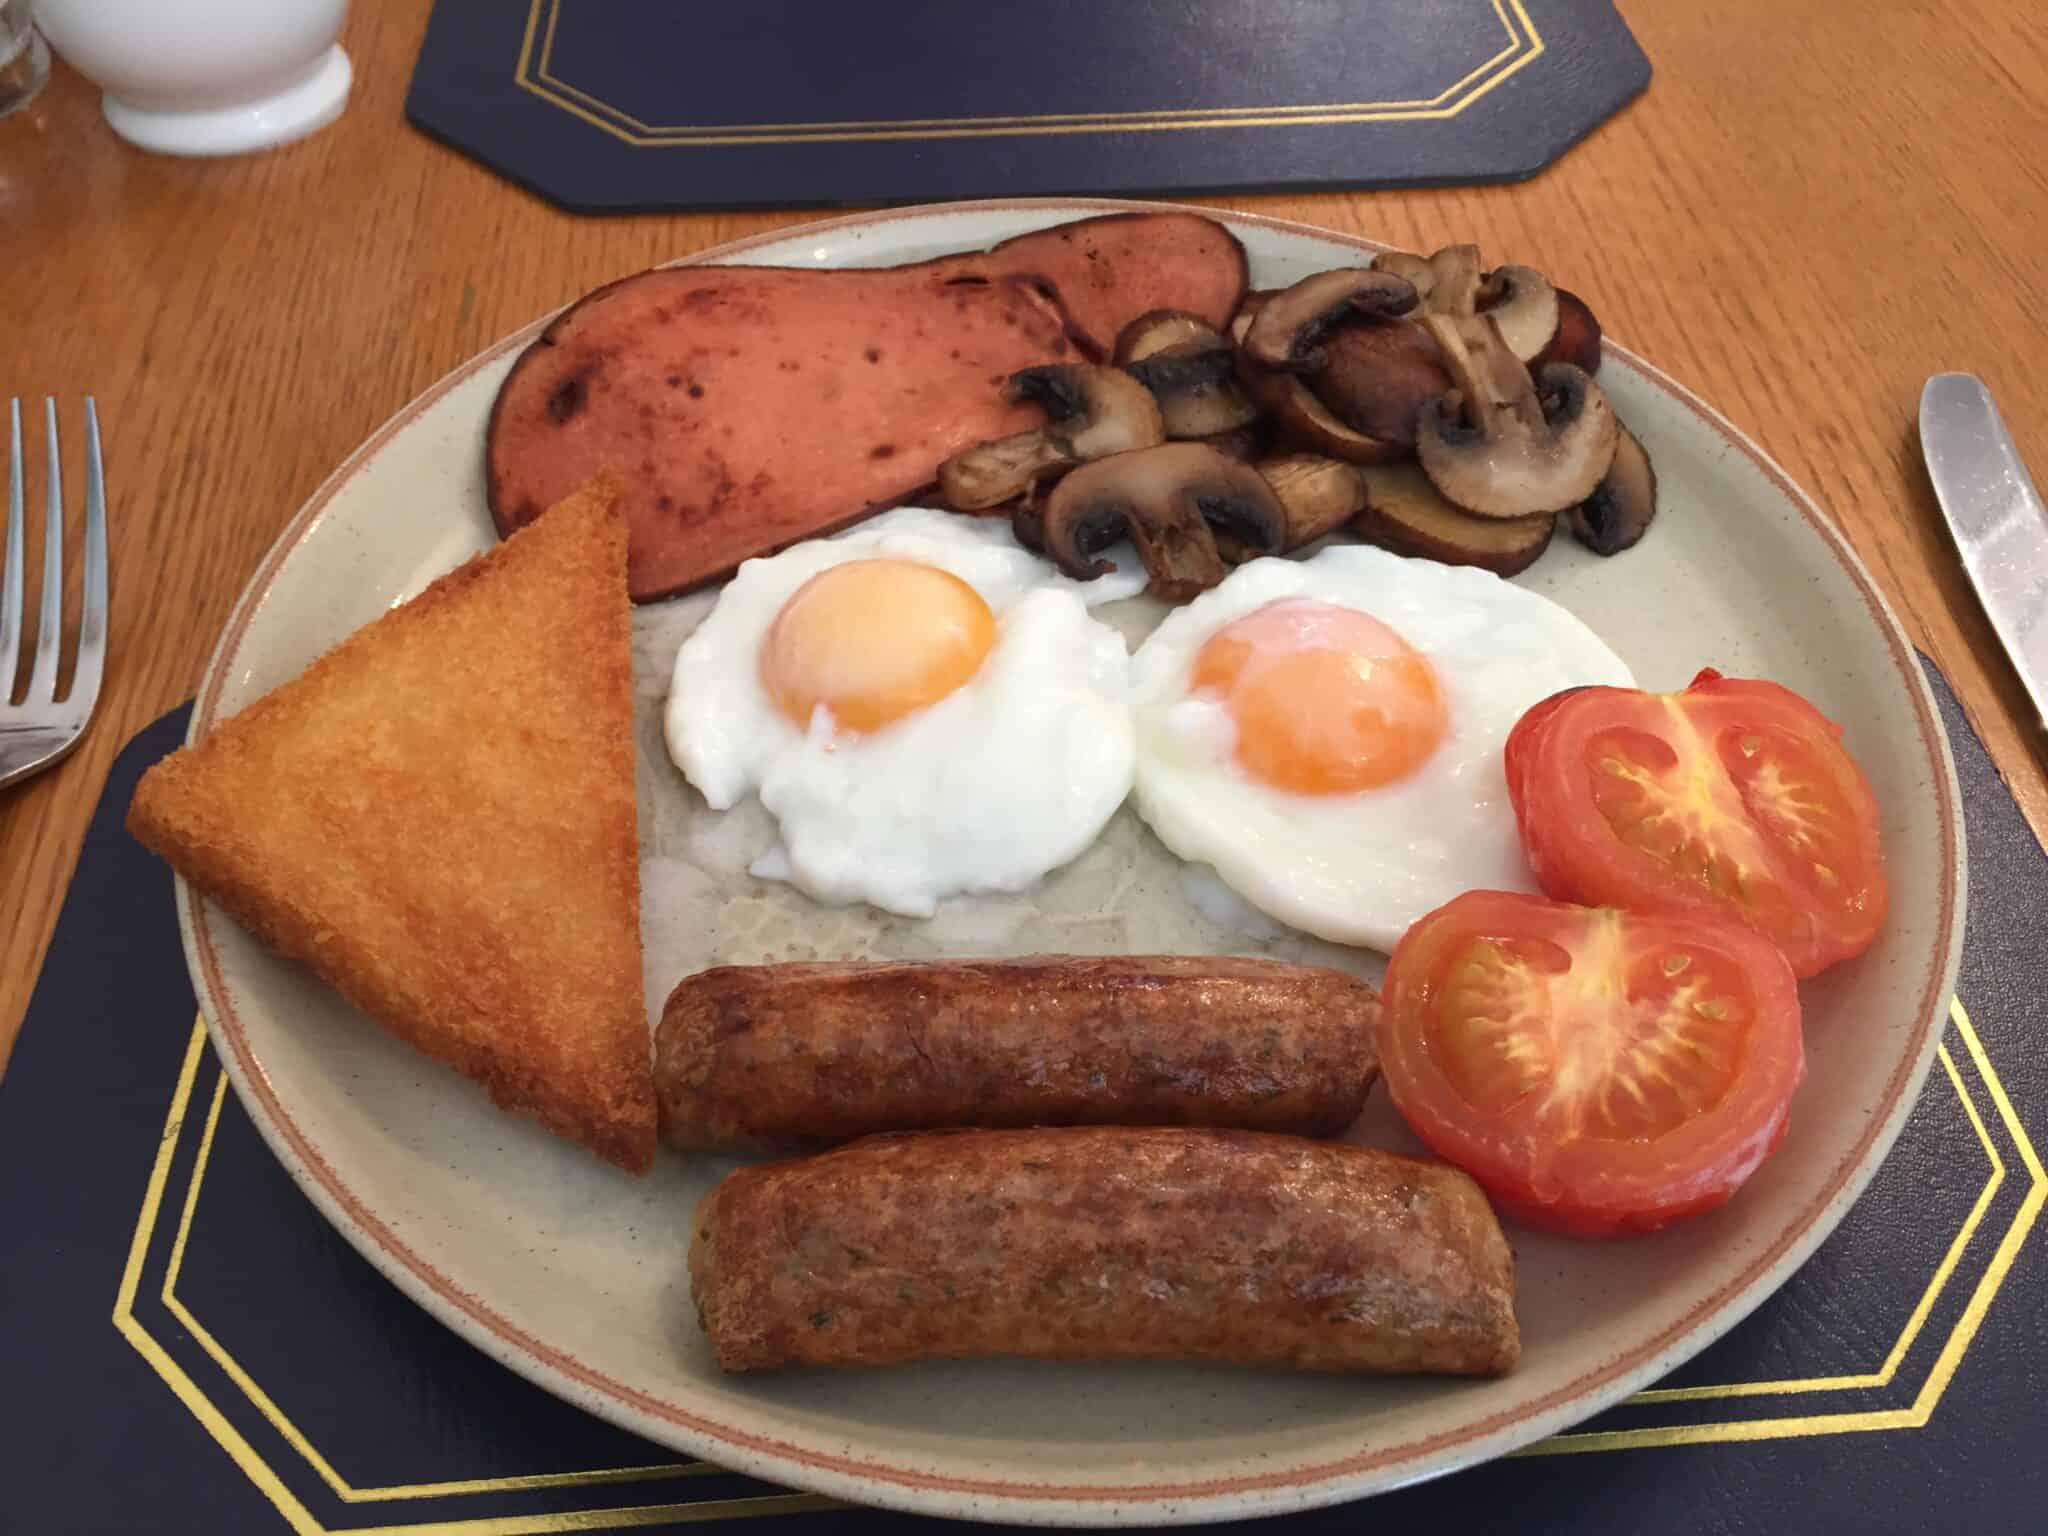 full-english-breakfast-the-places-where-we-go